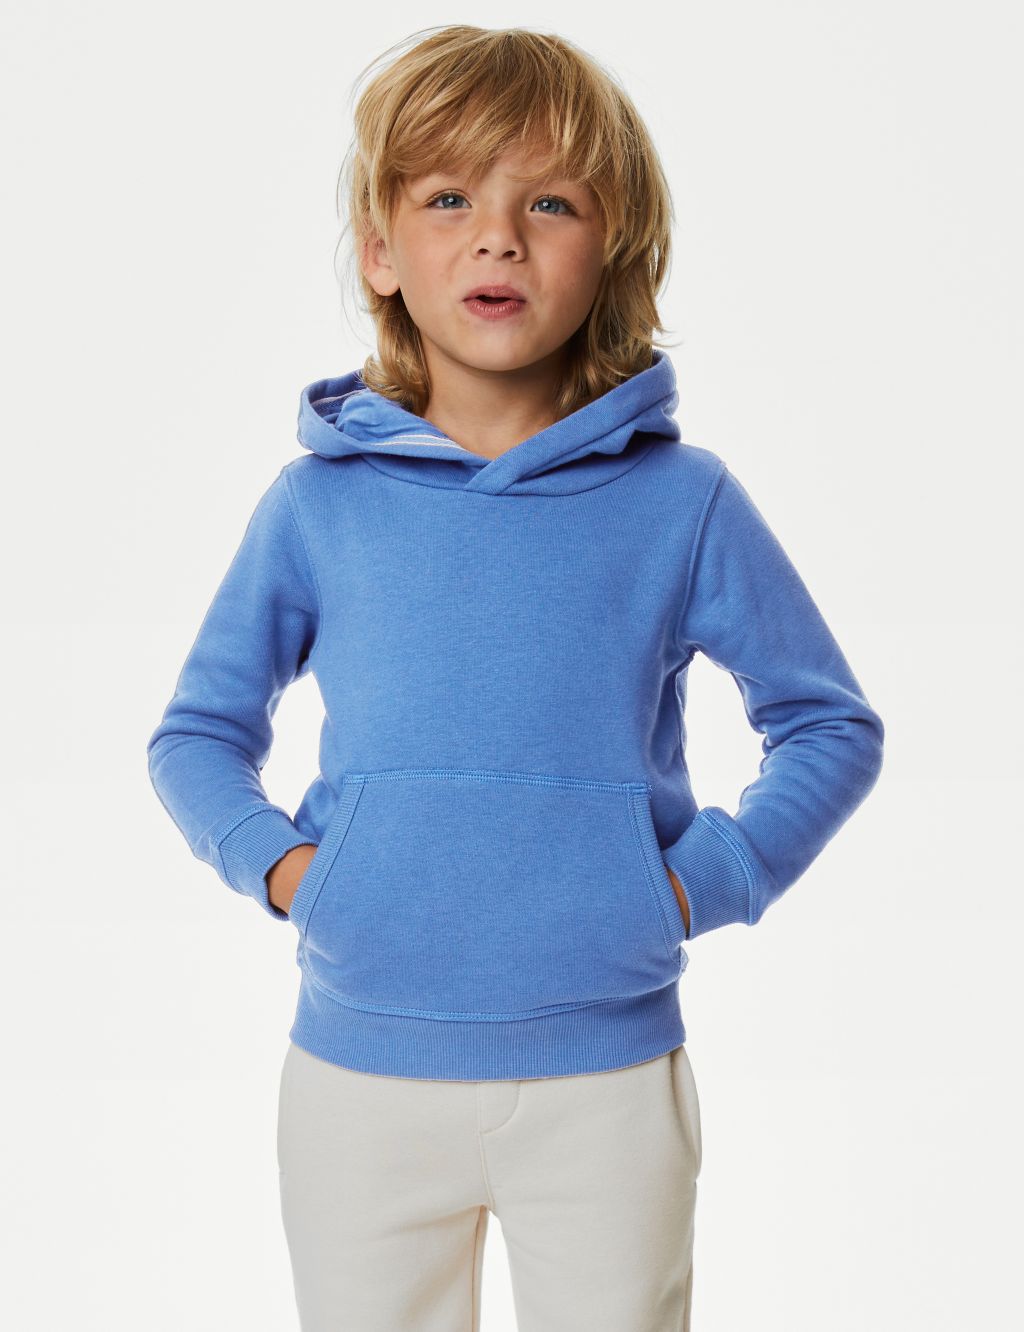 Cotton Rich Pullover Hoodies (2-7 Yrs) image 1